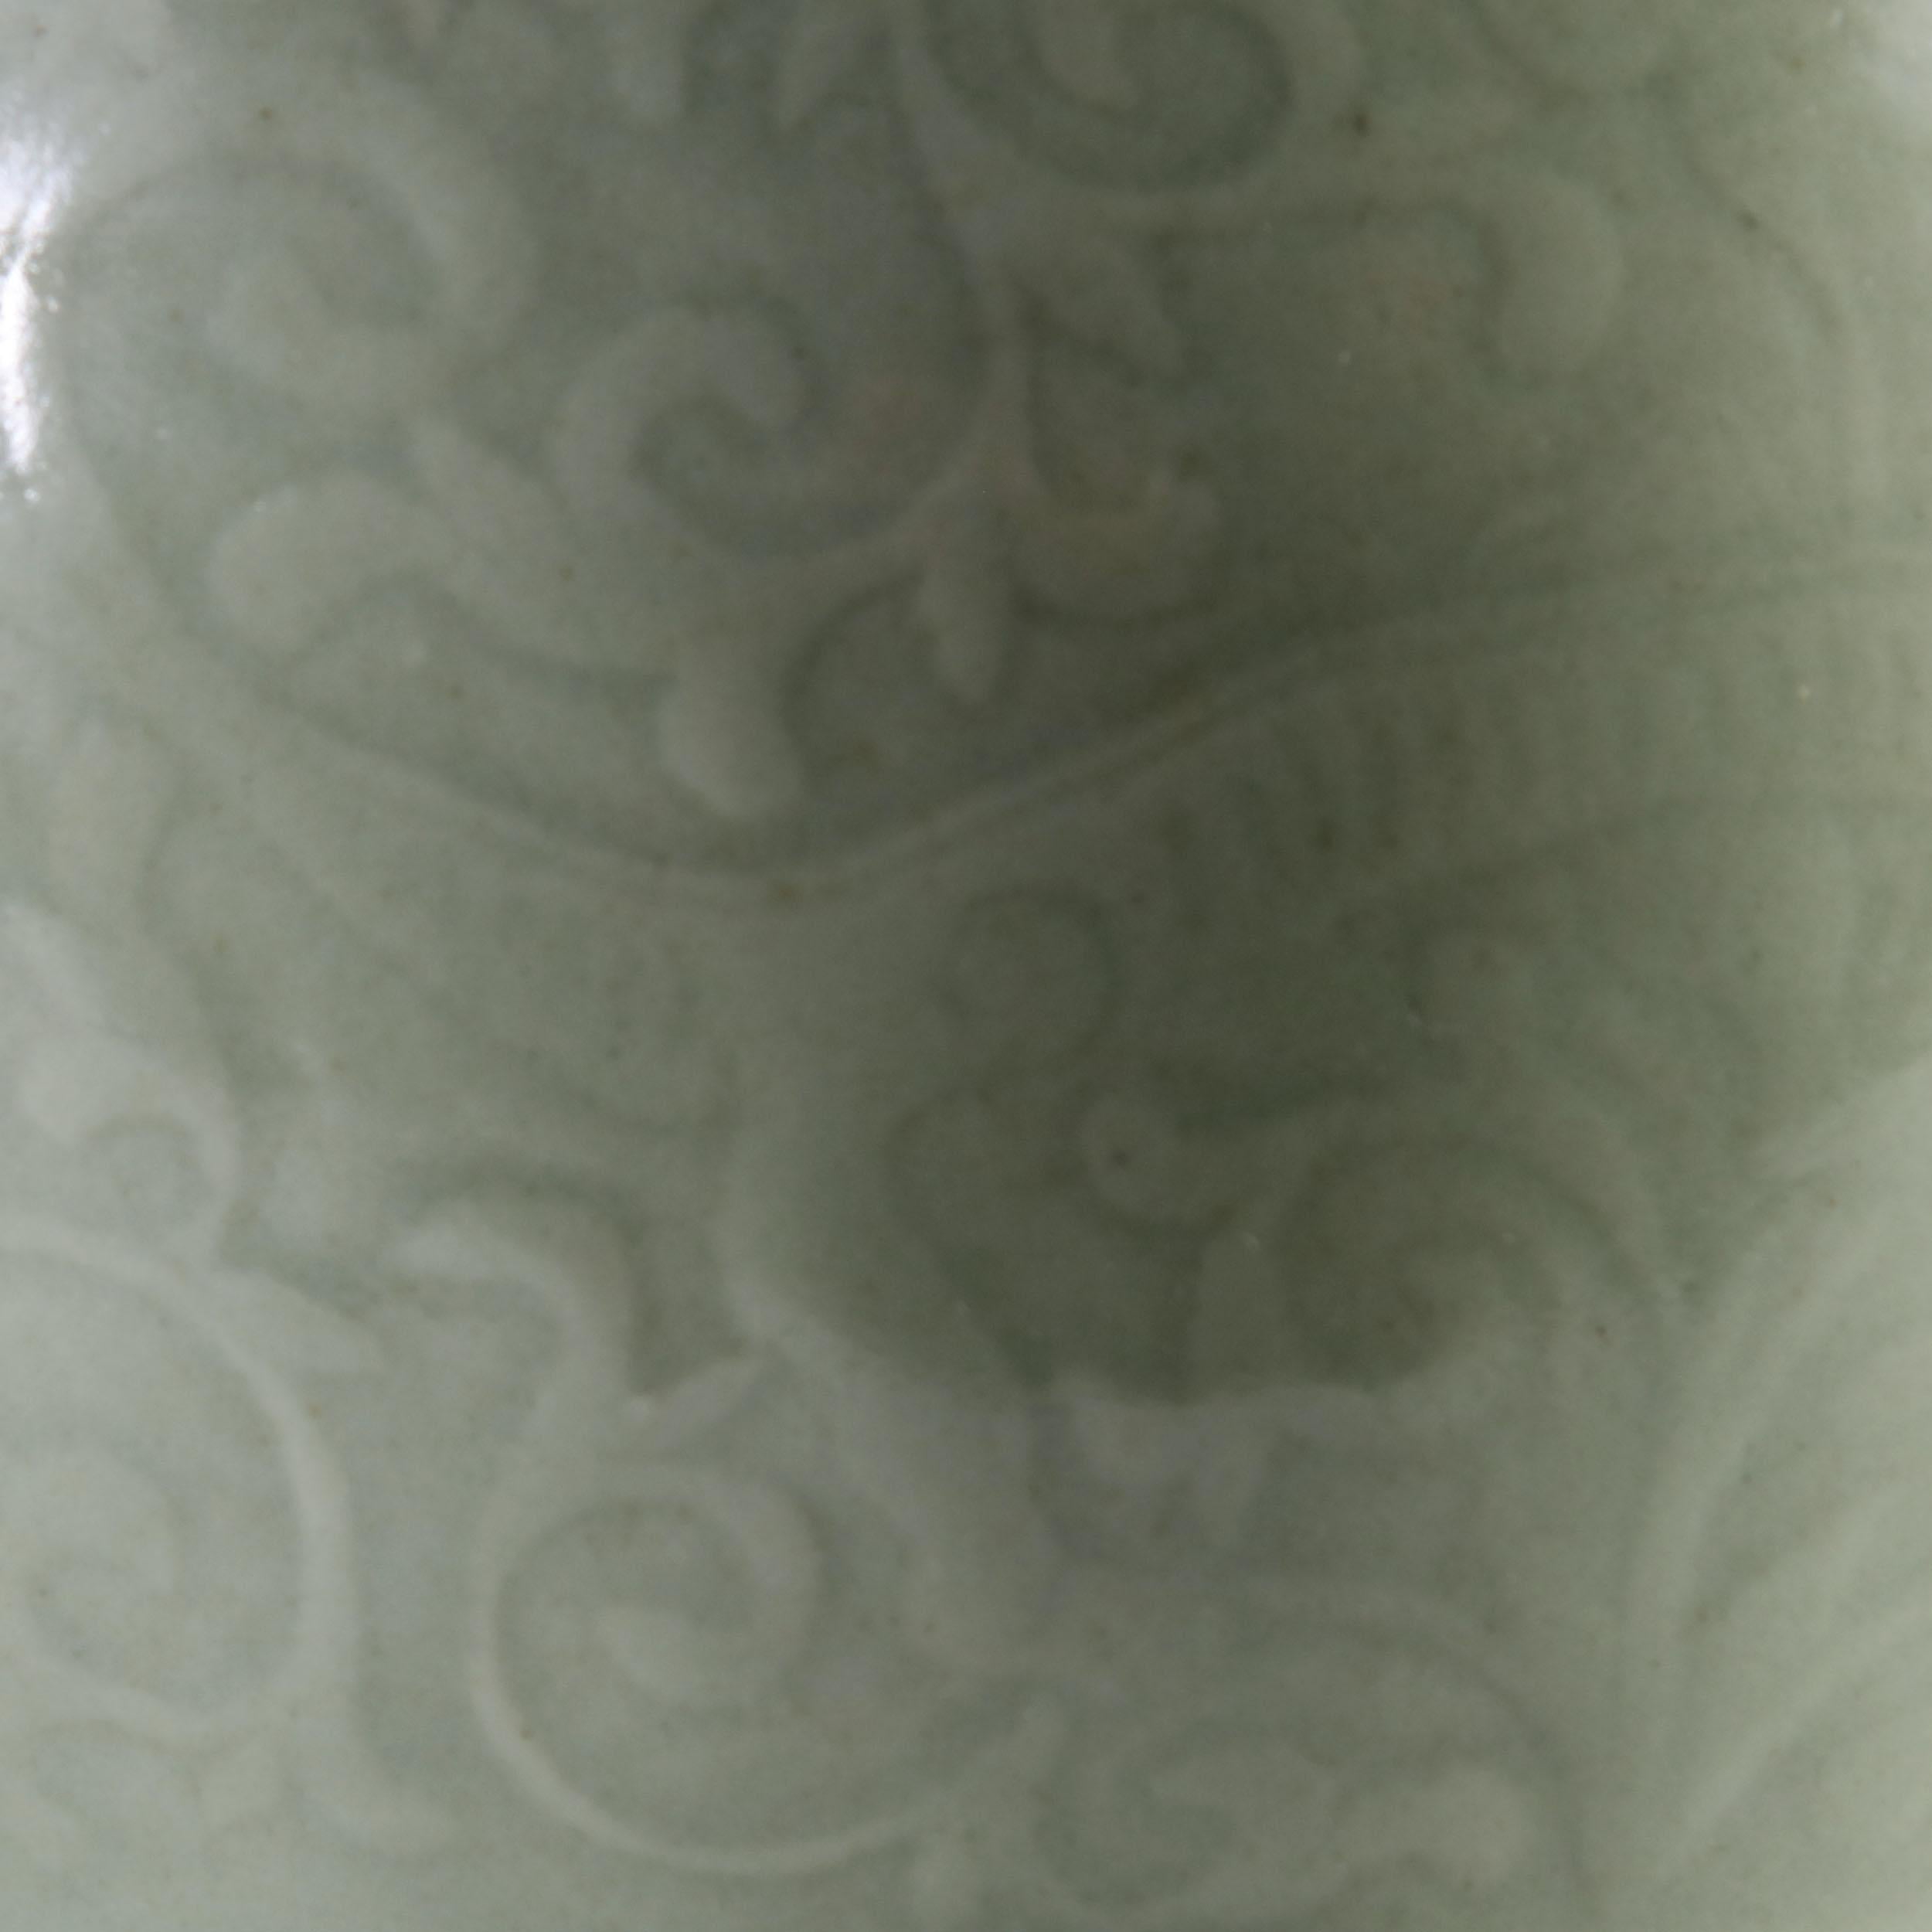 A late 19th century single Celadon vase with foliate decoration, now converted as a lamp.

Please note: lampshade not included.

Currently wired for the UK.